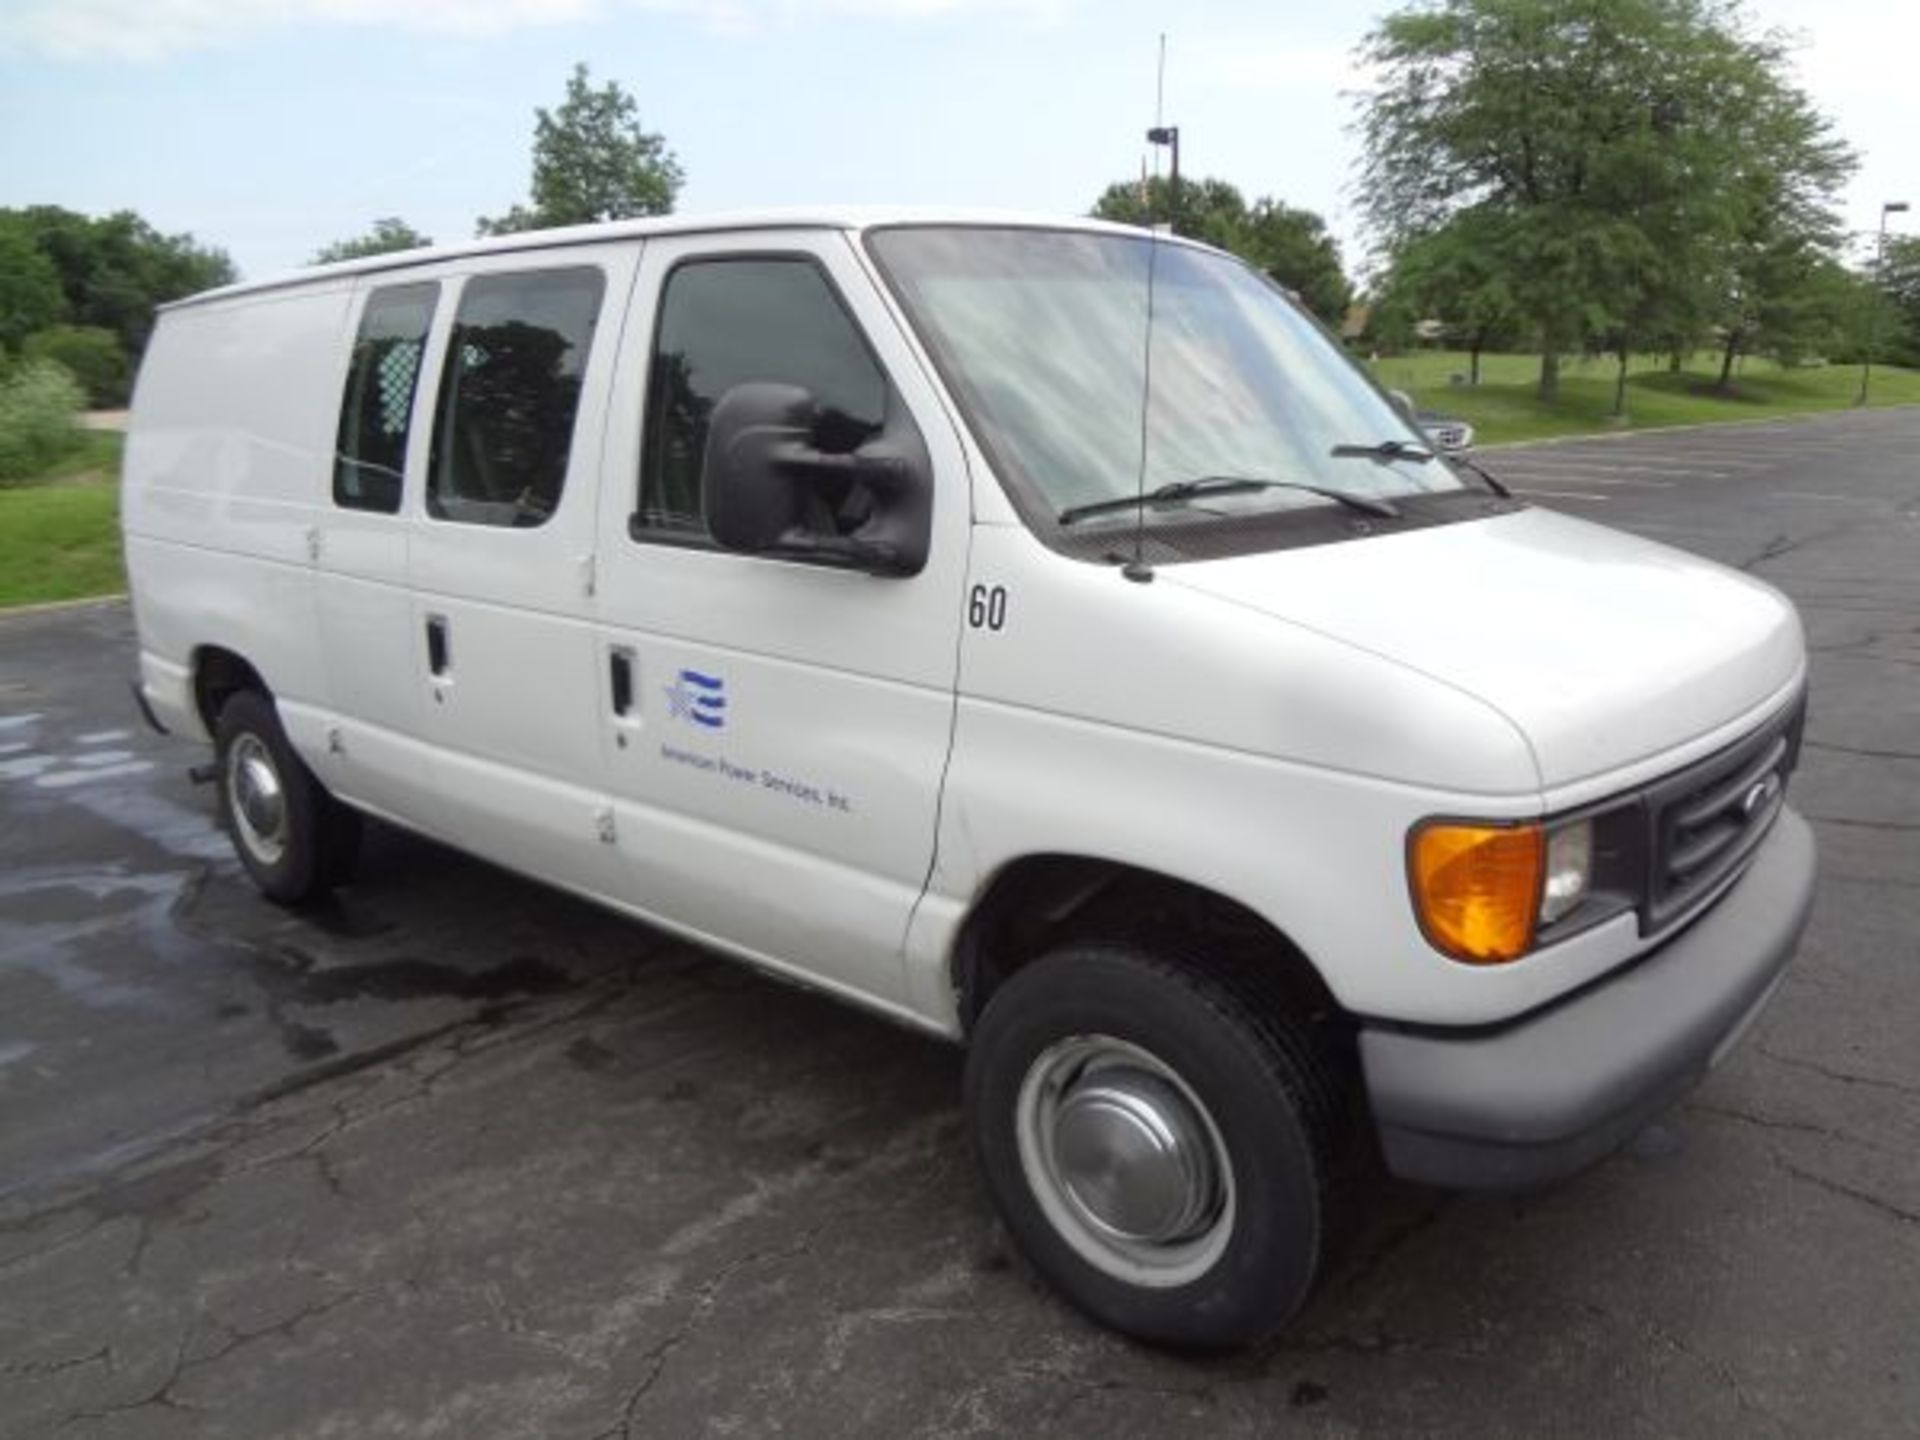 2007 FORD E150 CARGO VAN; VIN # 1FTNE14W770A67161, 4.6 LITER GASOLINE ENGINE, AUTOMATIC - Image 2 of 8